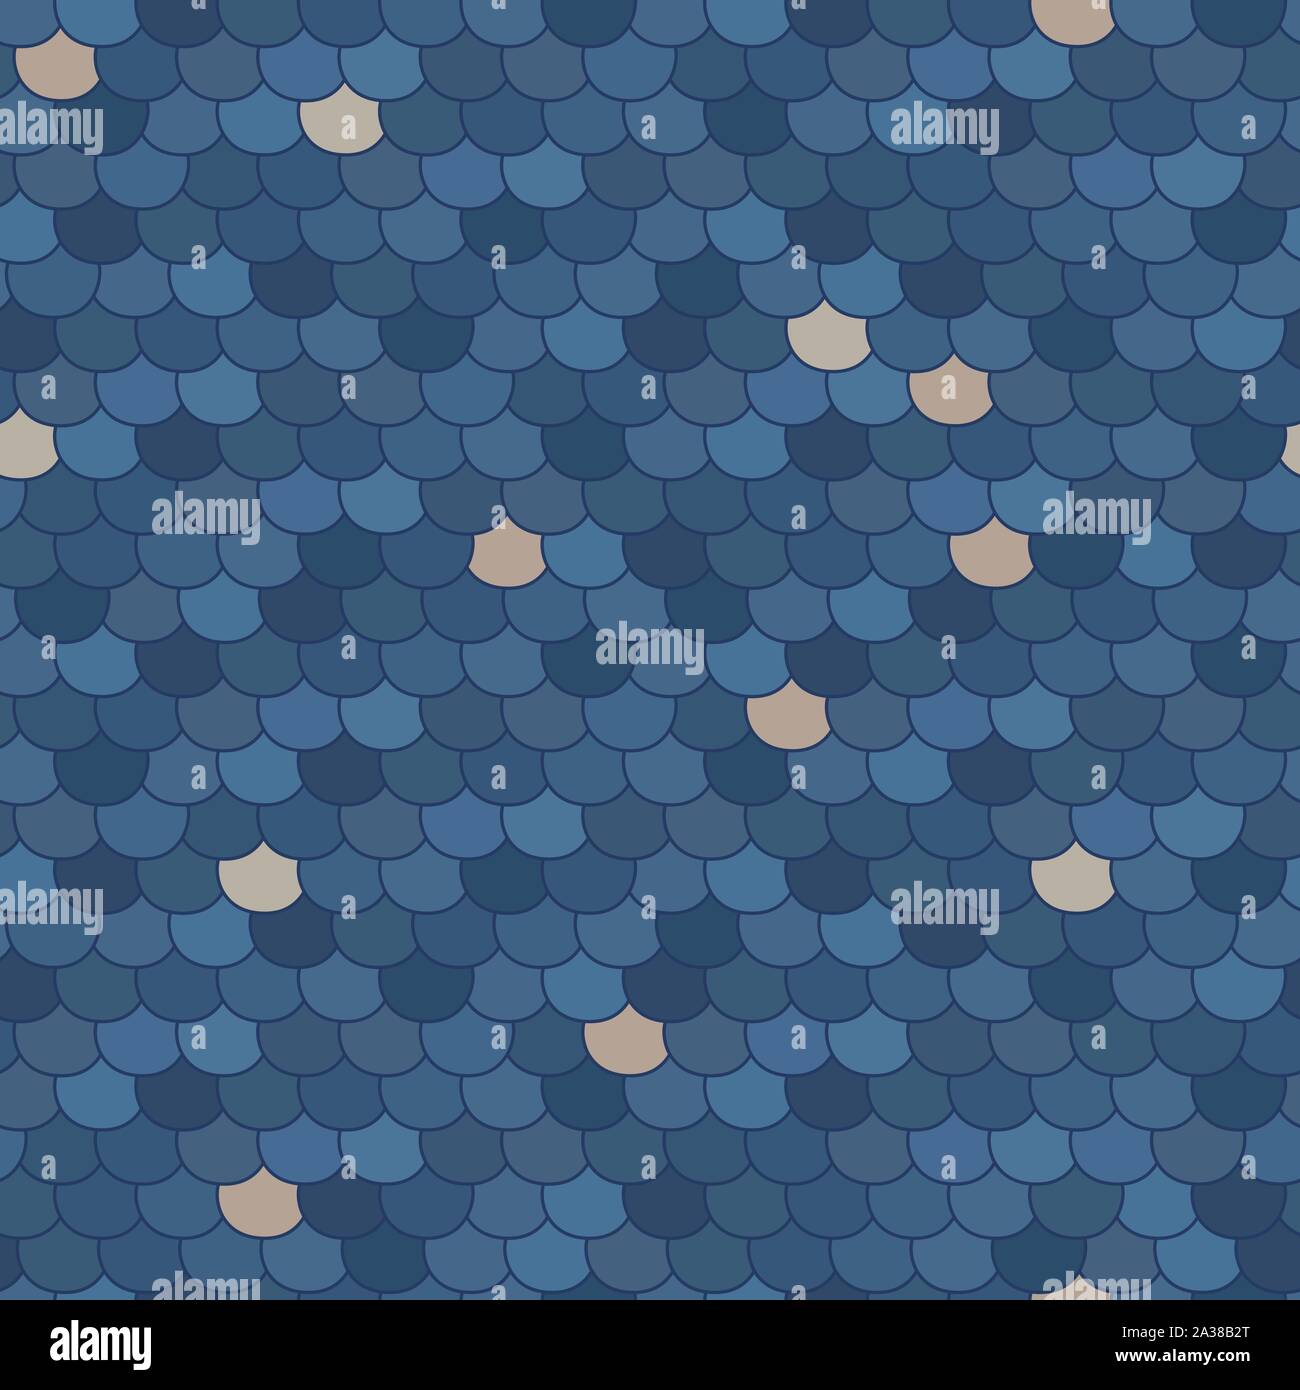 Abstract seamless pattern. Stylized roof shingles. Shades of blue and beige. Random arc texture. For decoration, wallpaper, web-page background. Stock Vector